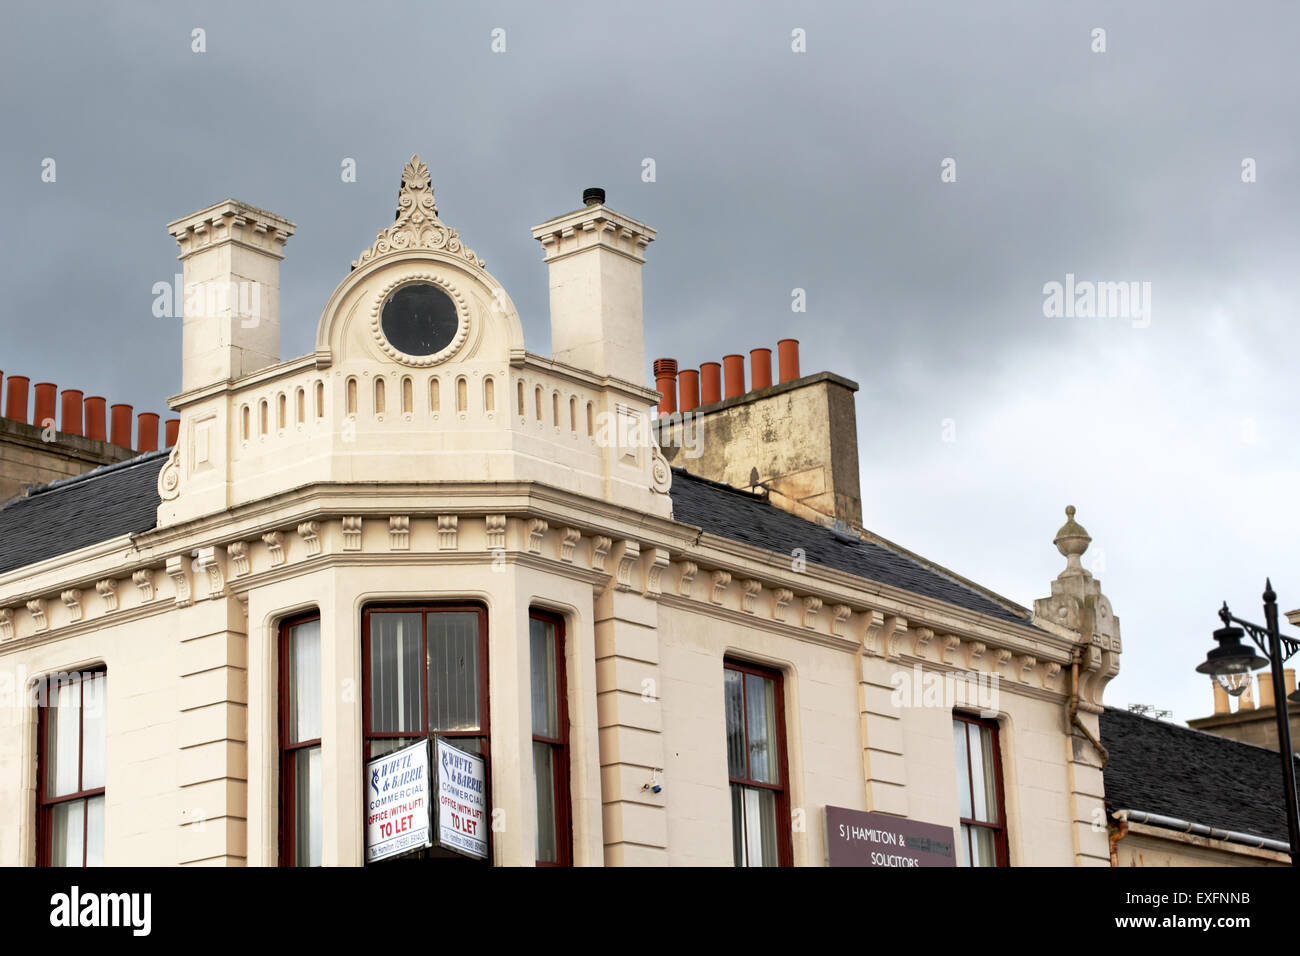 Old, historical building in Airdrie, North Lanarkshire, Scotland Stock Photo